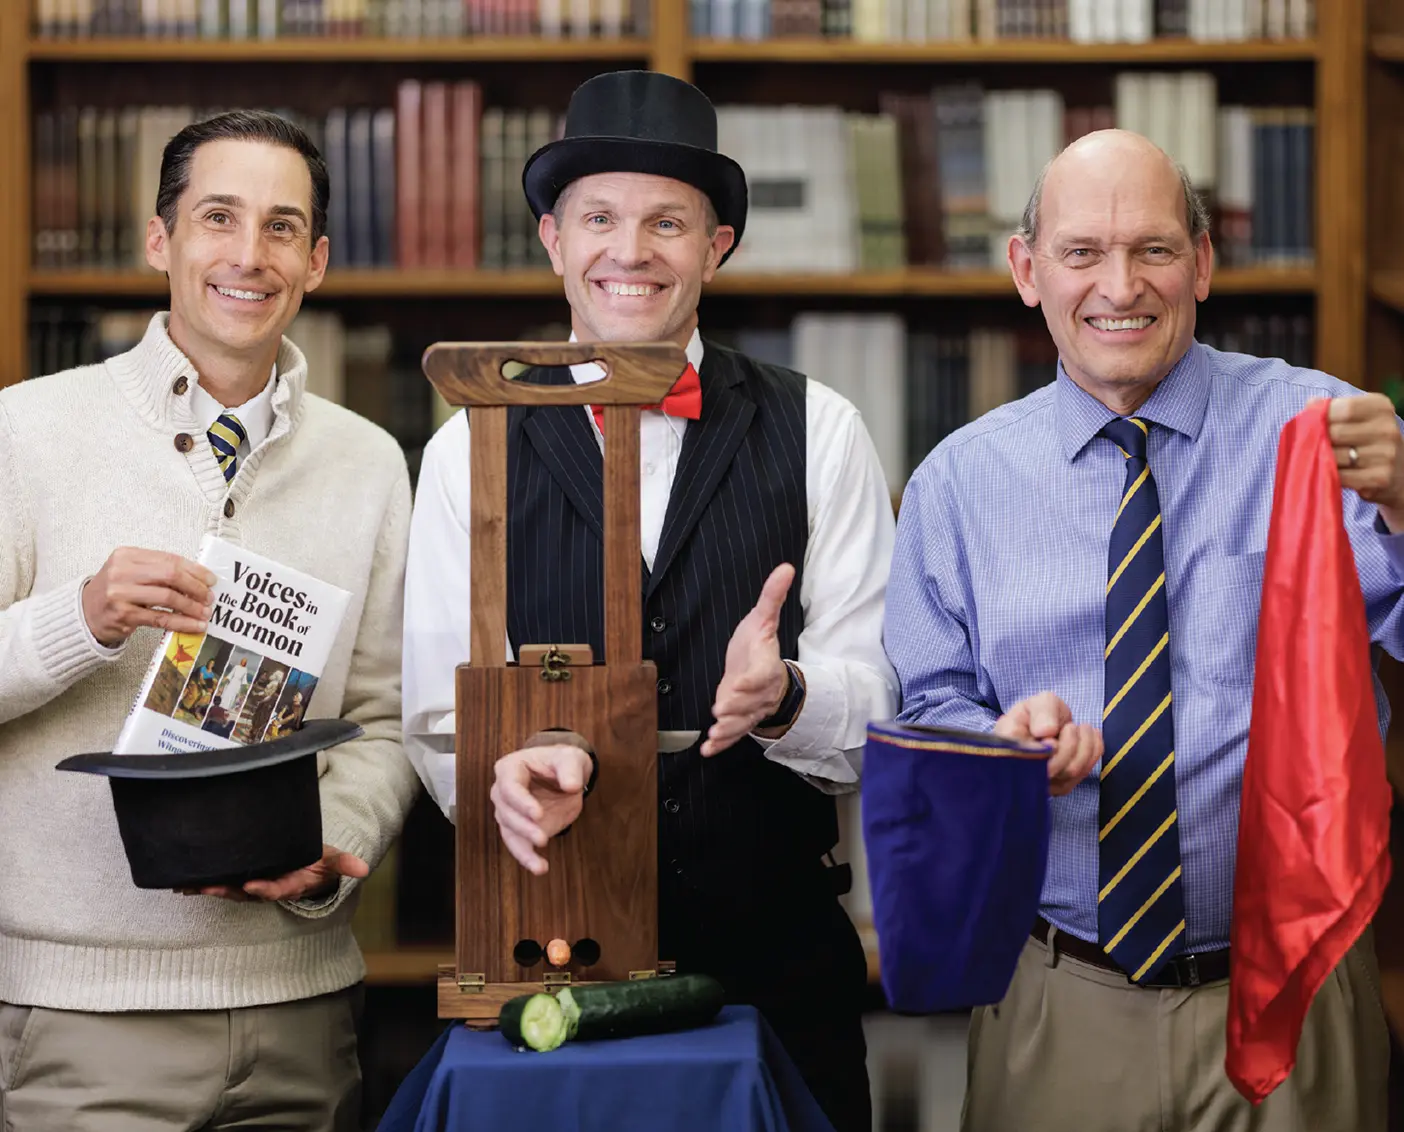 John Hilton III pulls his book "Voices in the Book of Mormon" from a hat, Devan Jensen demonstrates a guillotine magic trick, and Alex Baugh holds other magic props.   